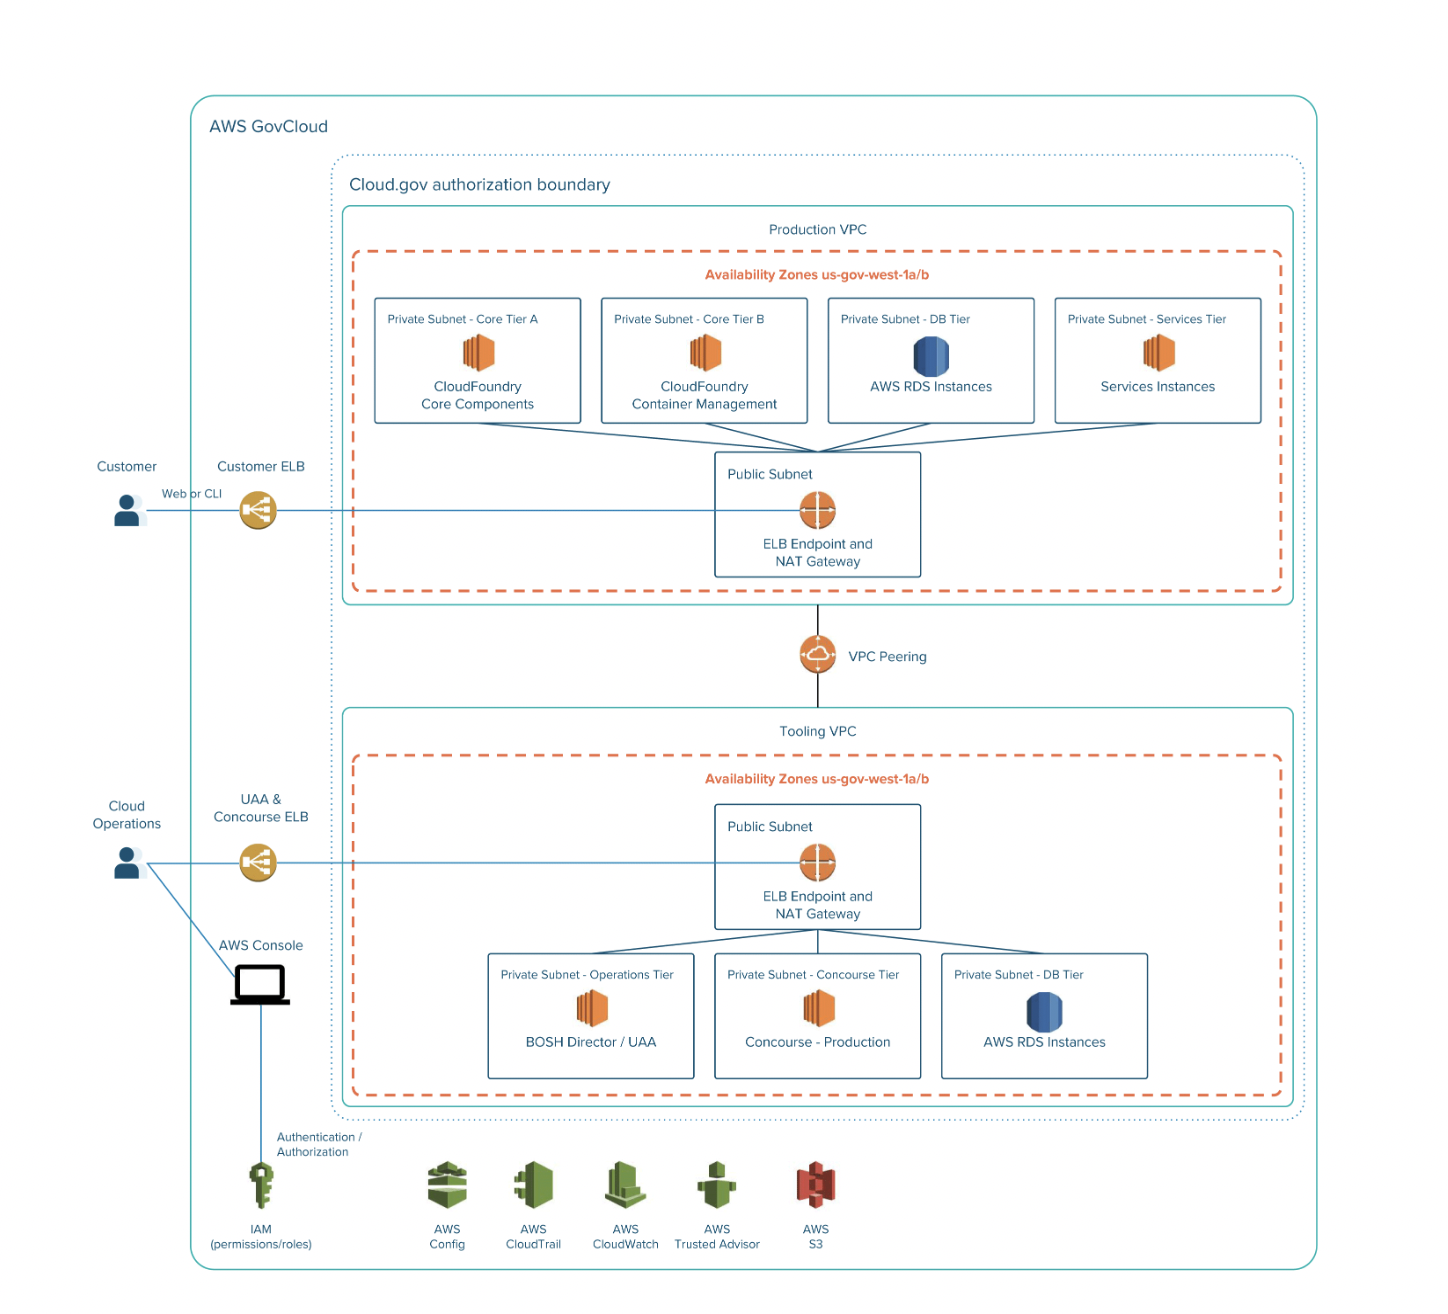 A diagram shows how customers and cloud operators interact with AWS GovCloud through production VPC and tooling VPC.